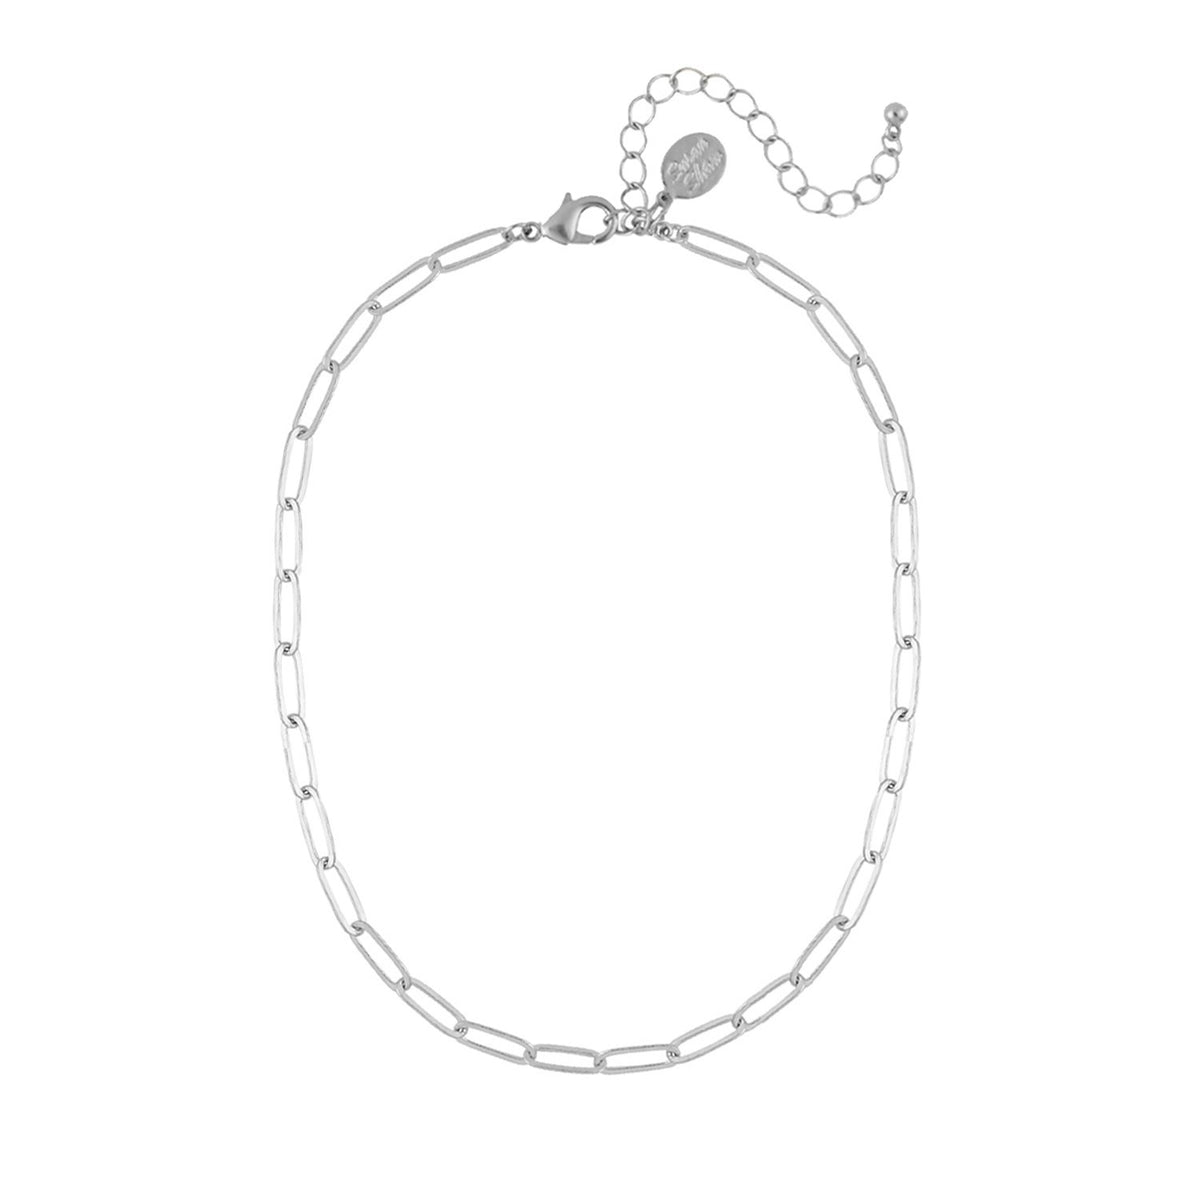 Sabrina Silver Sterling Silver 3mm Paperclip Chain Bracelet for Women & Men  Nickel Free Italy 7 inch | Amazon.com